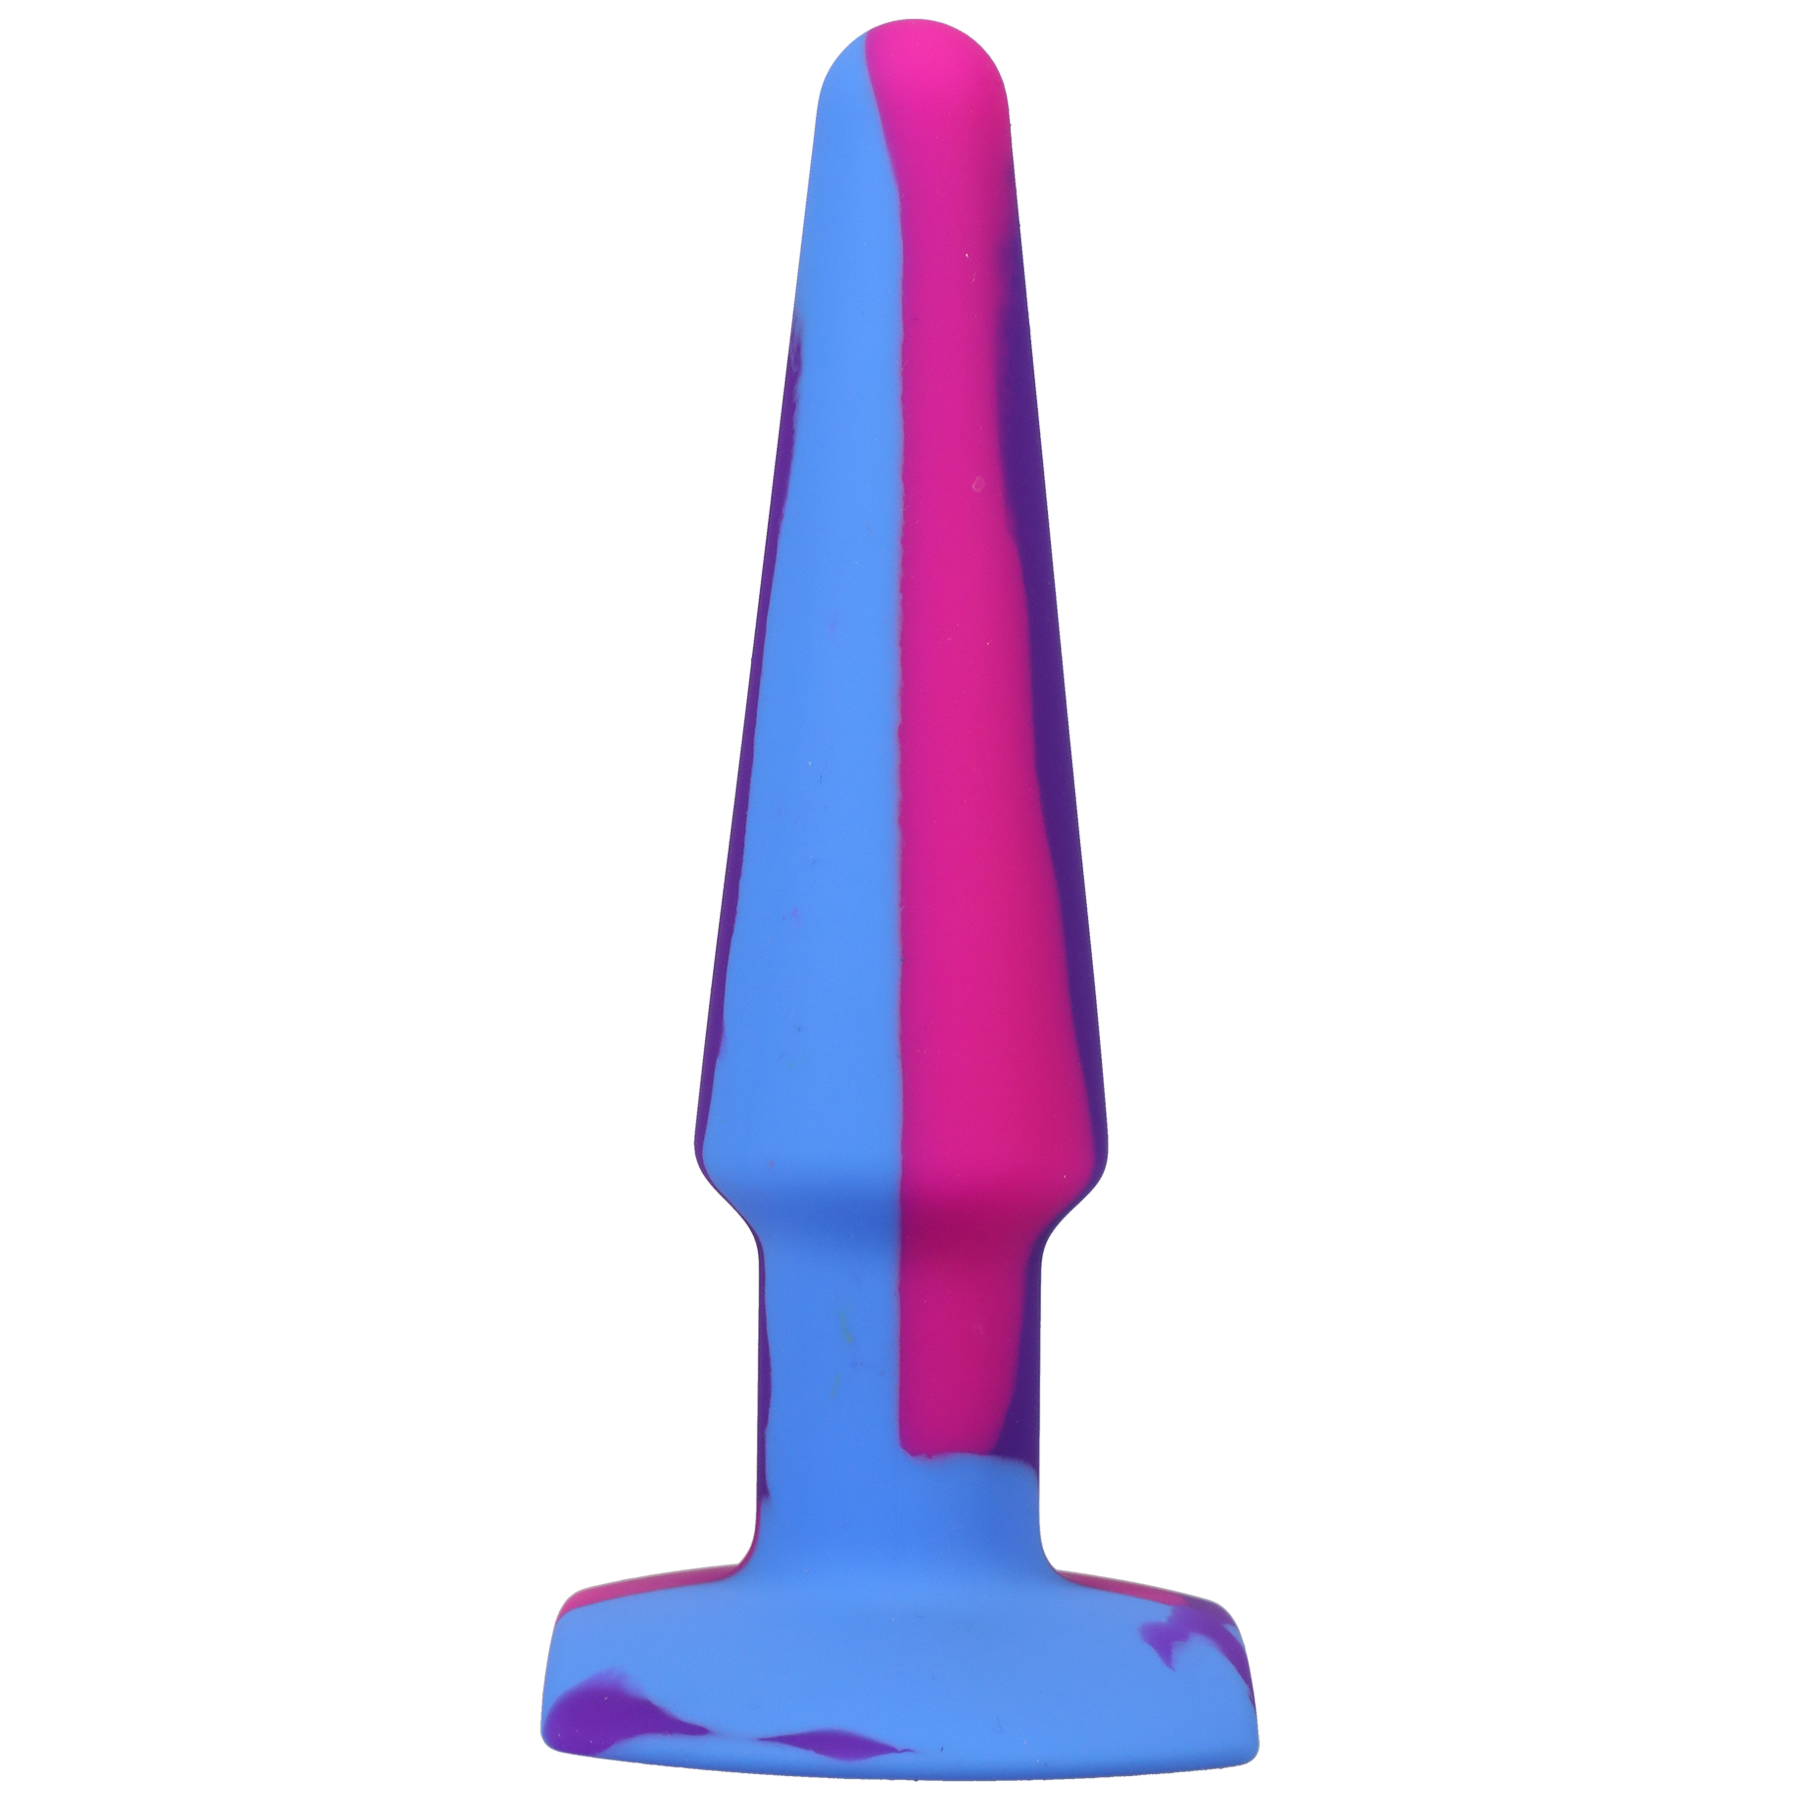 Silicone Anal Plug - 5 inch, Berry - Thorn & Feather Sex Toy Canada